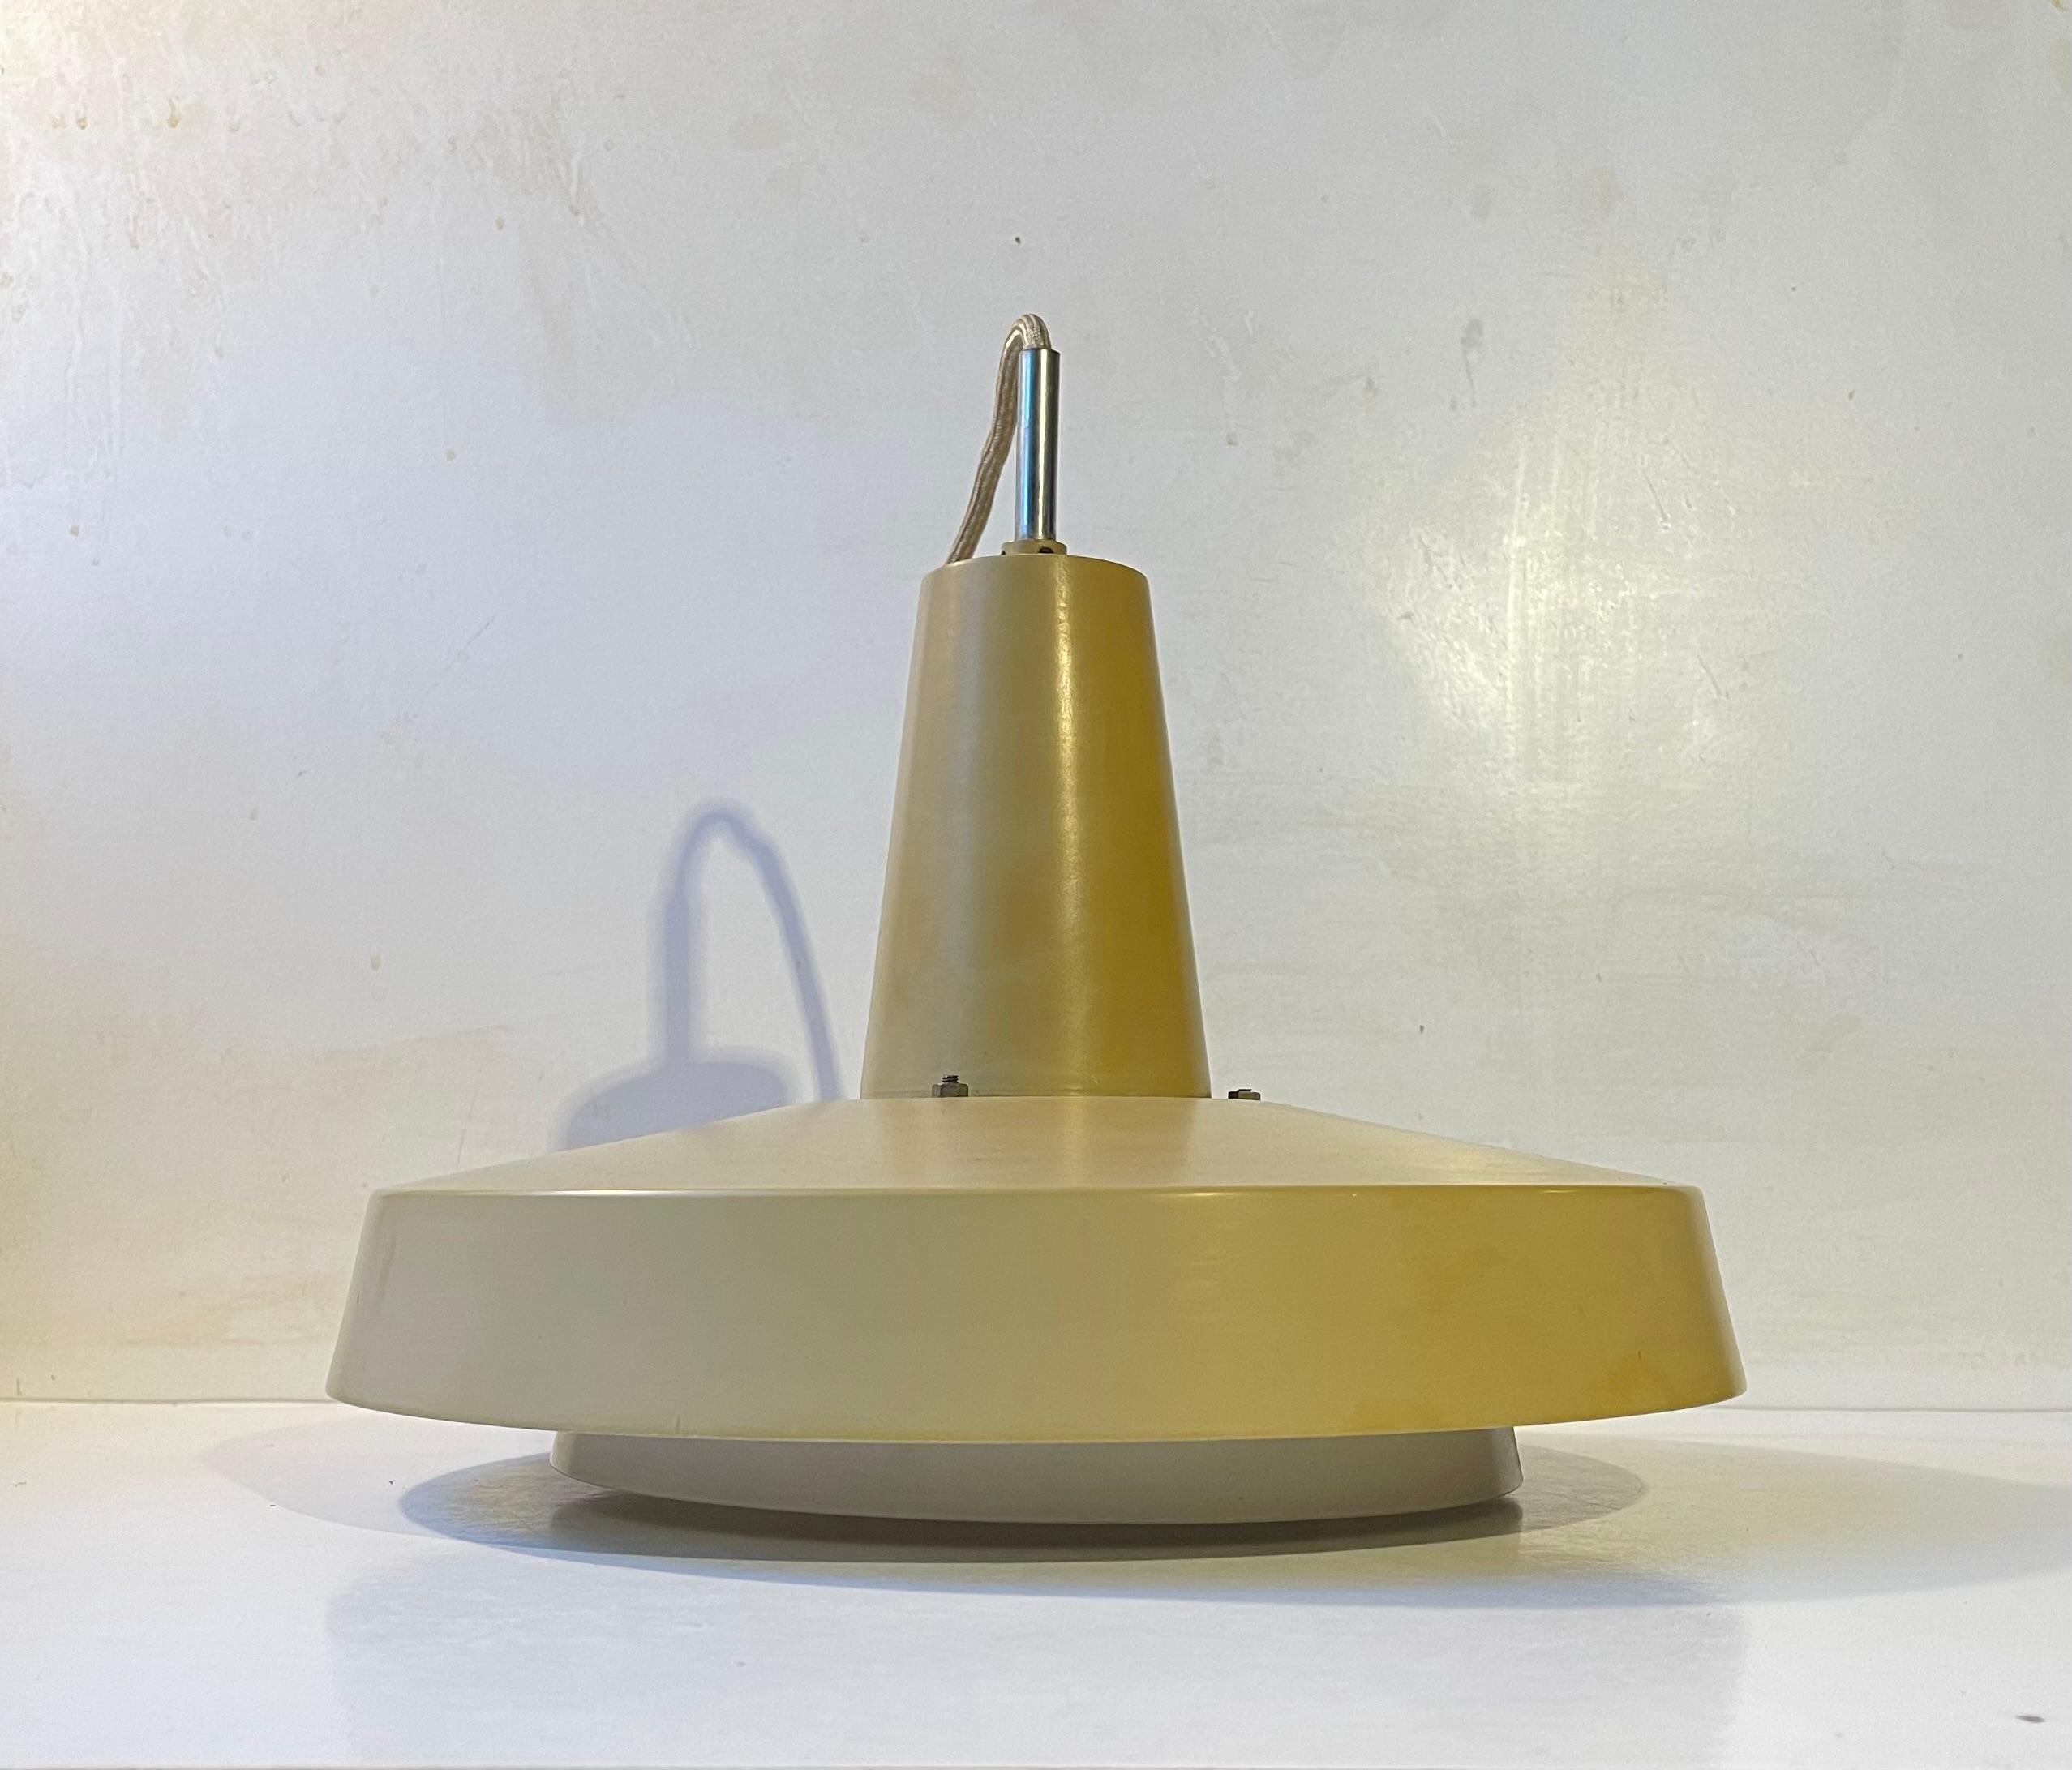 A rare pastel mustard yellow pendant light from Lyfa in Denmark. It is called 'Top' and was designed in 1967 by husband and wife Eva & Niels Koppel in collaboration with Erik Thyring and Gert Edstrand. It suitable for lighting in your entrance, over